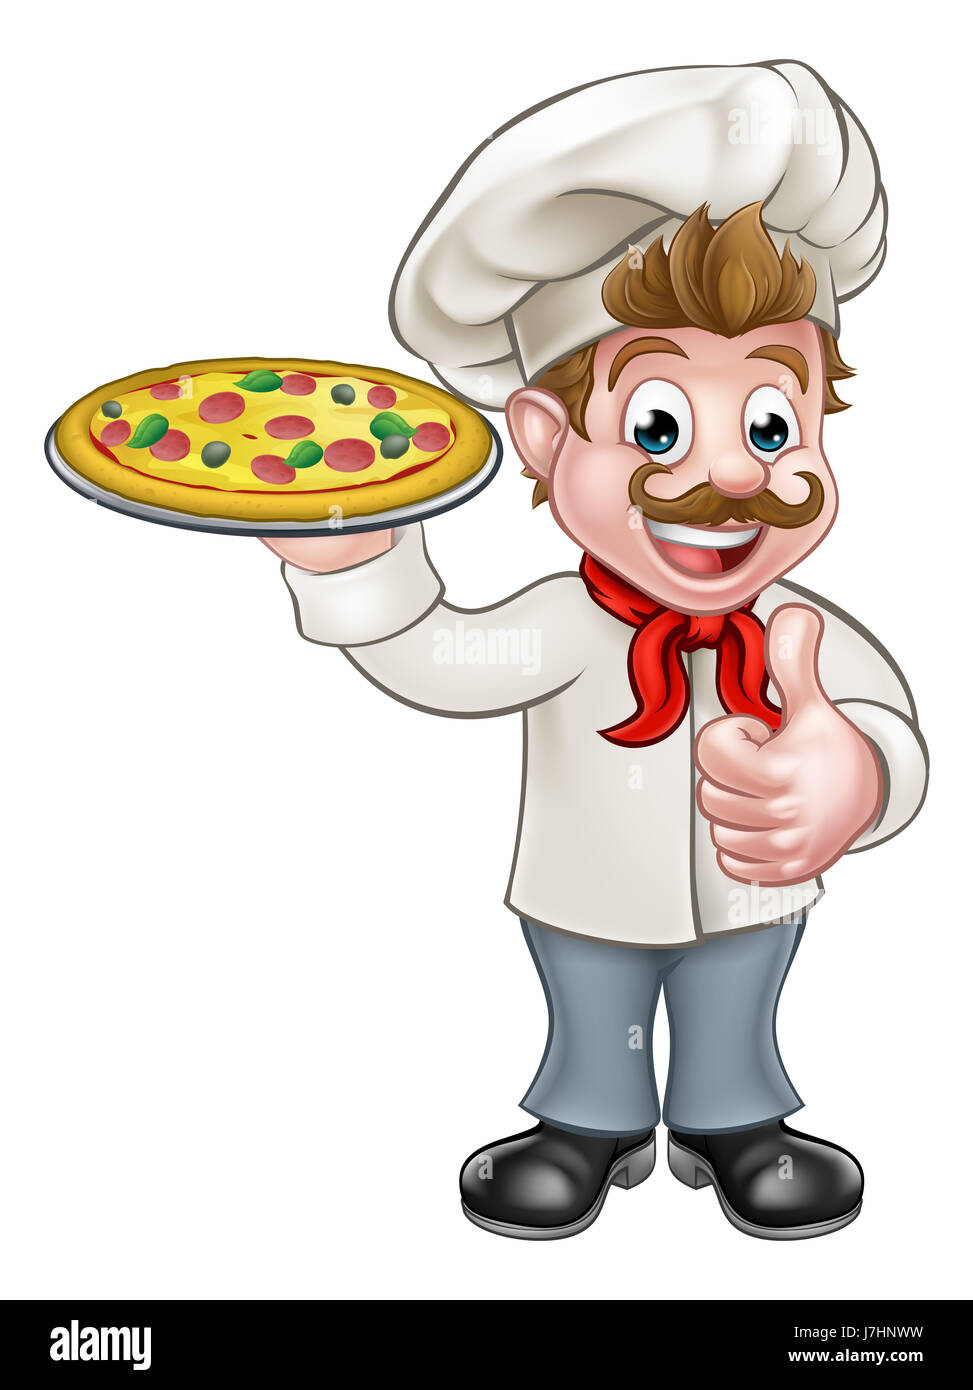 Cartoon chef cook character holding a pizza and giving a thumbs up Stock Photo